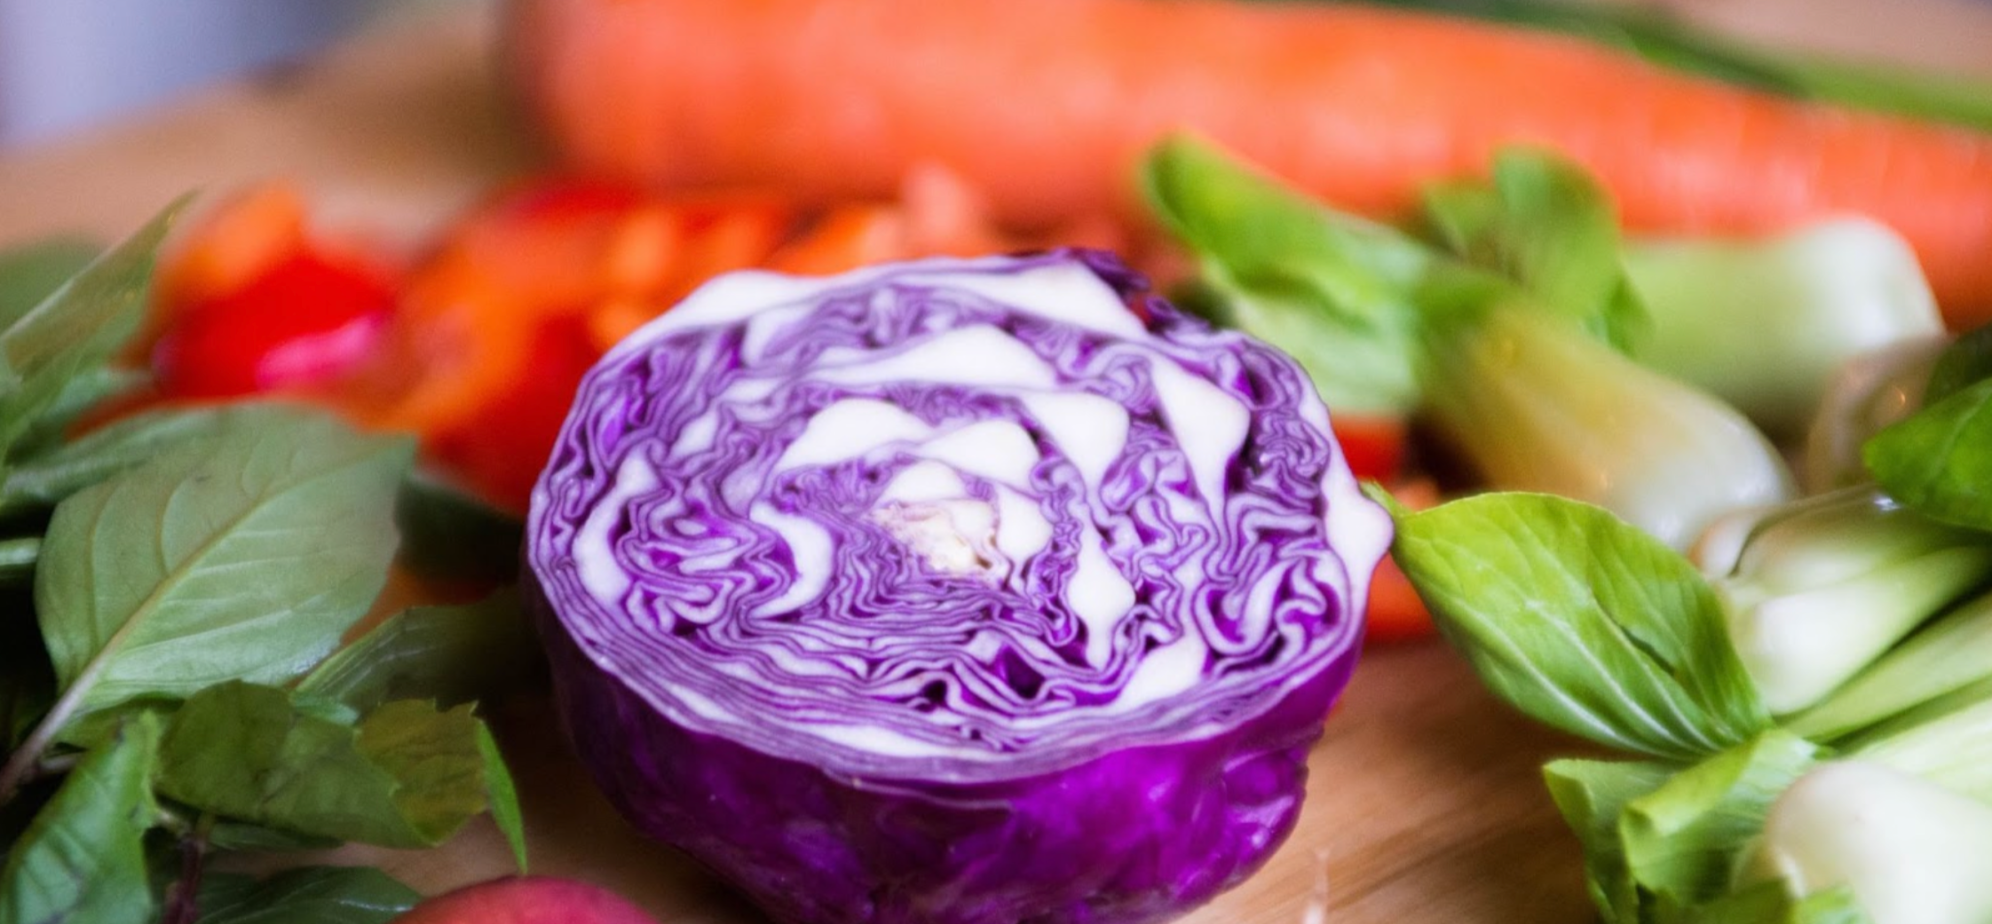 Purple cabbage and vegetables for Veganuary